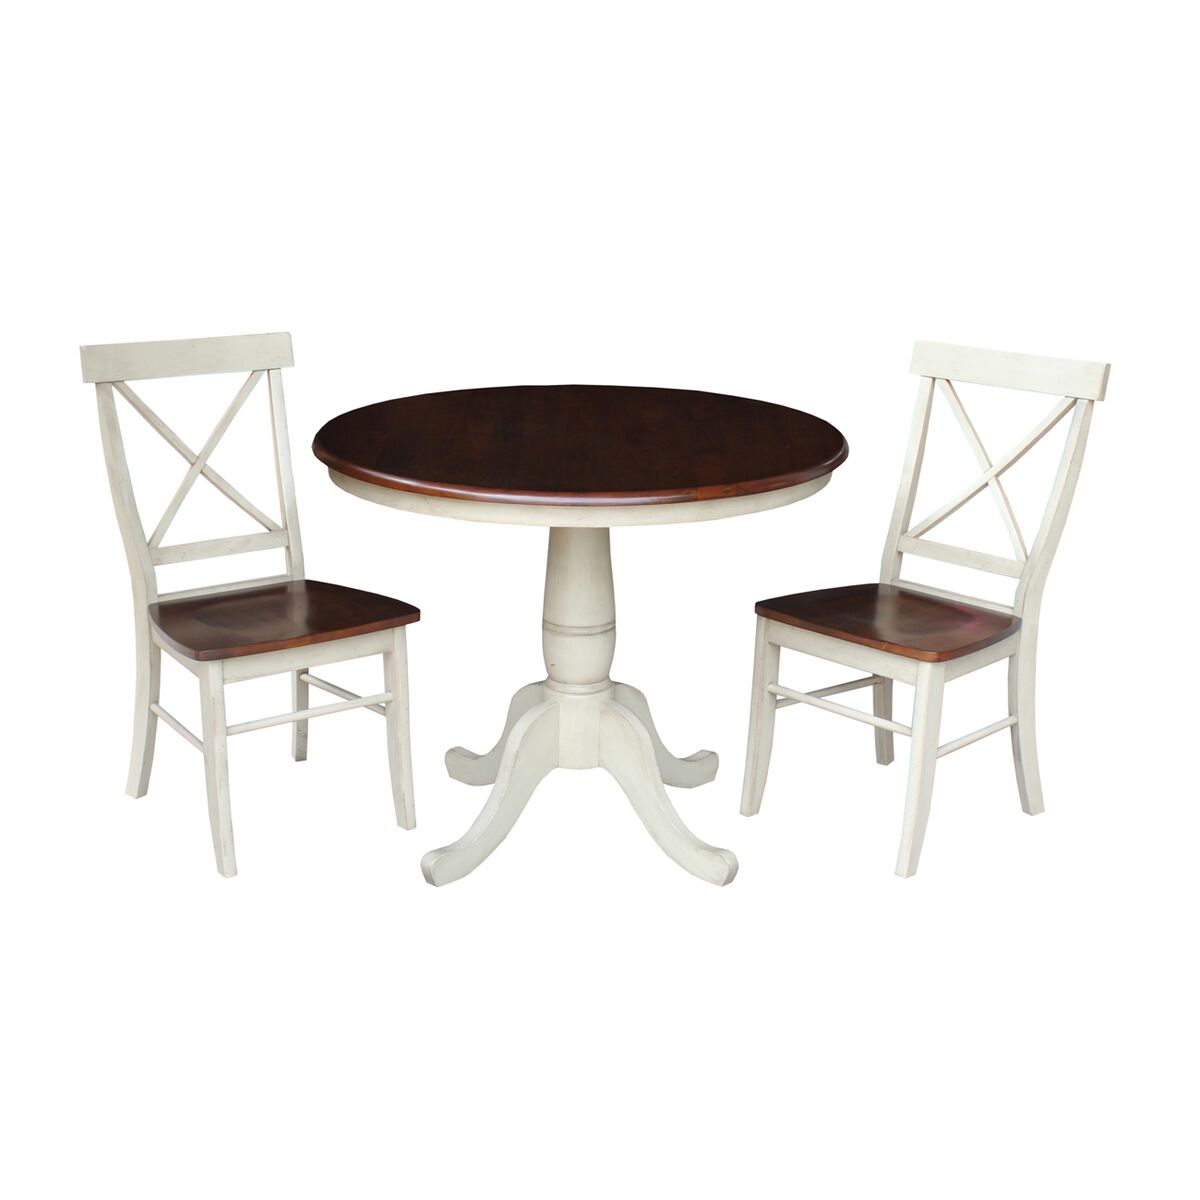 K12-36rt-c613p 36 In. Round Top Pedestal Table With 2 X-back Chairs - 3 Piece Set